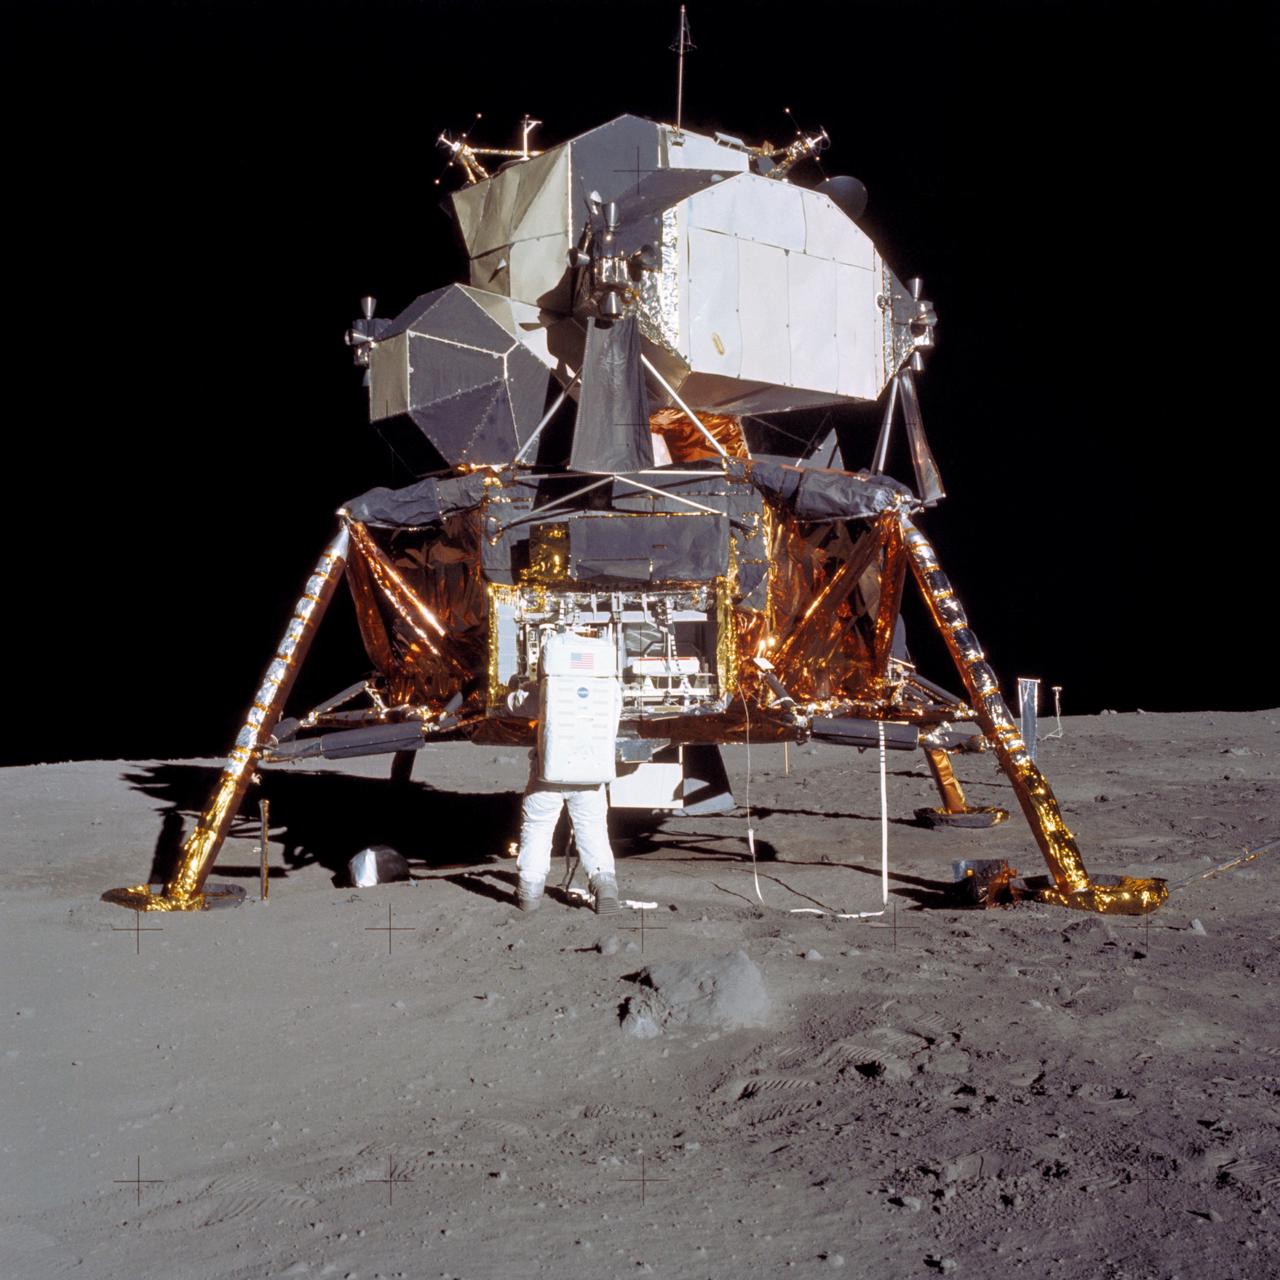 Apollo 11 lunar module as it rested on lunar surface